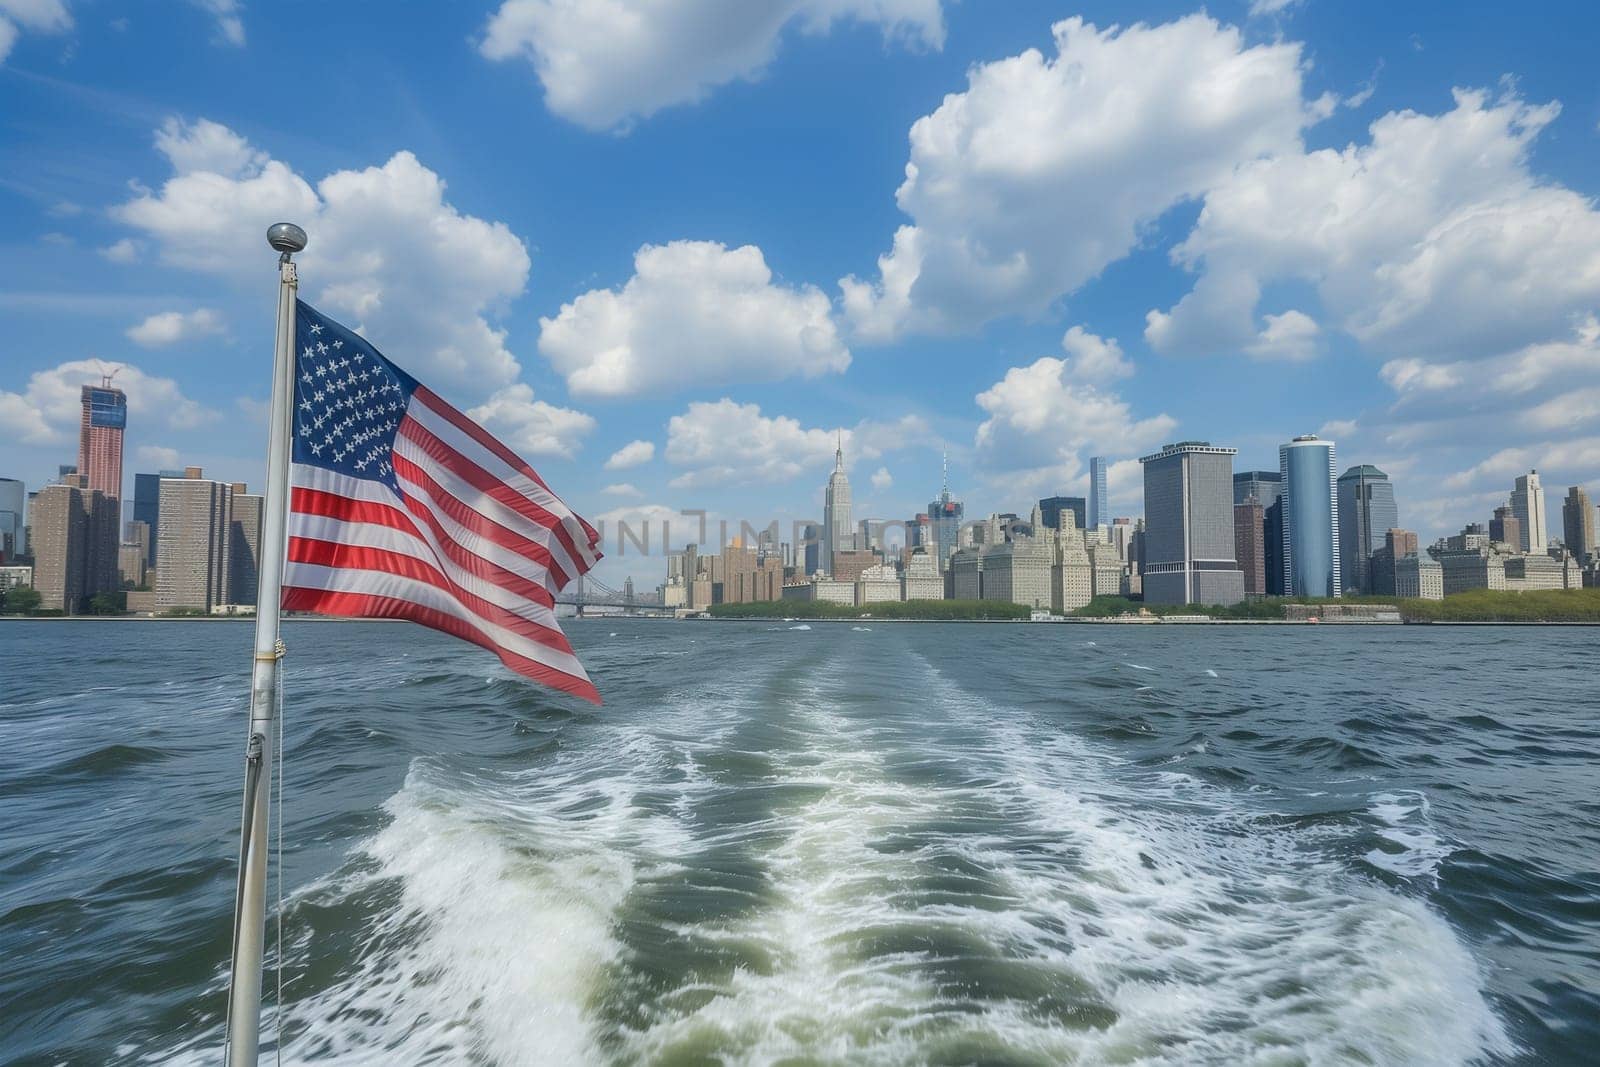 An American flag is displayed on a boat sailing on the water, symbolizing patriotism and pride in the USA on Flag Day.